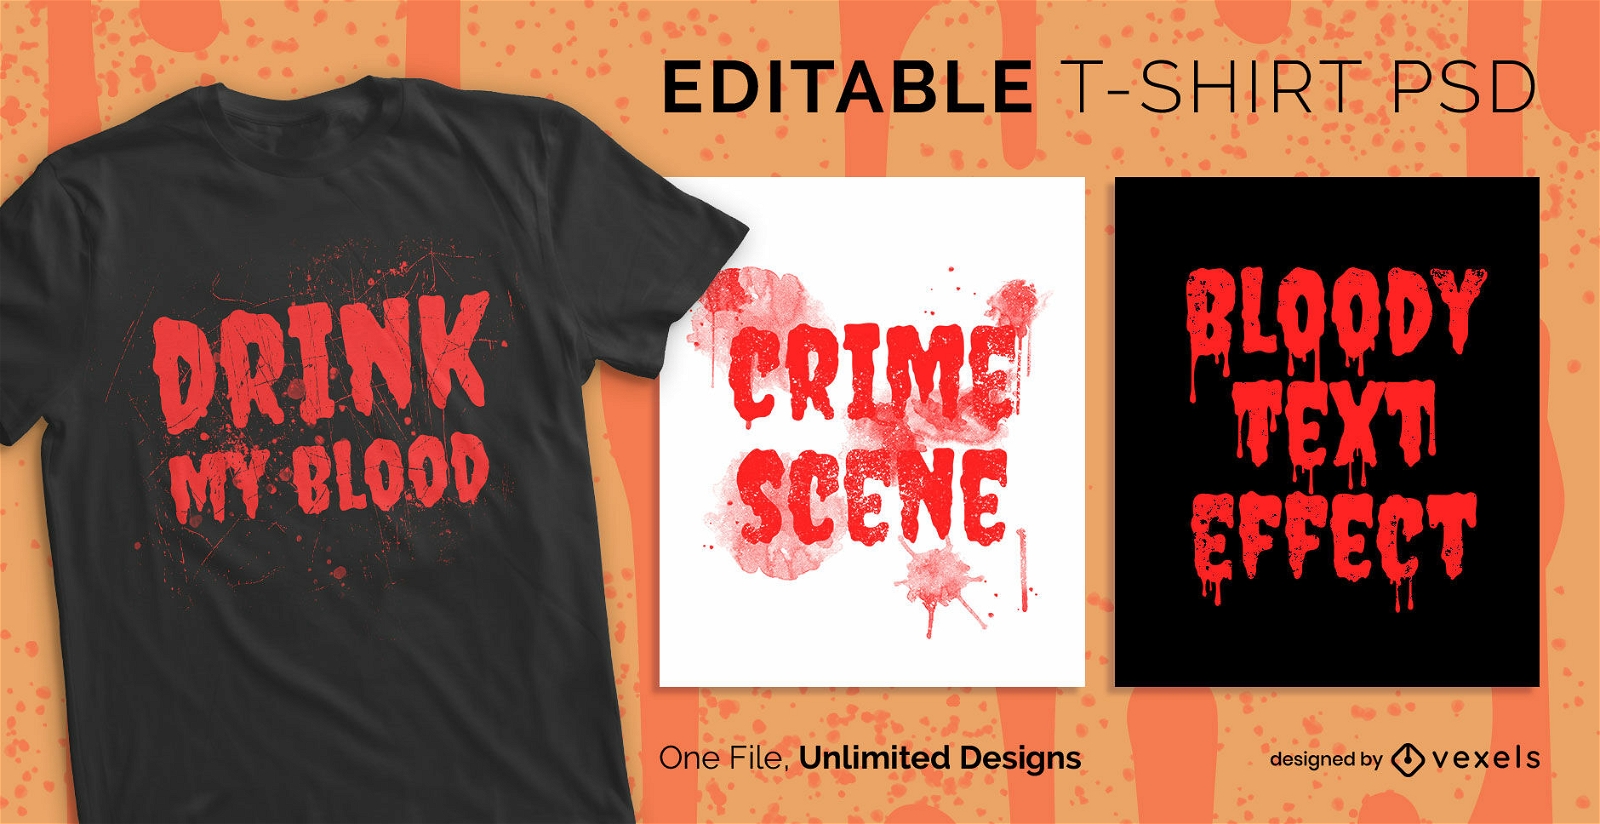 Bloody text scalable t-shirt psd